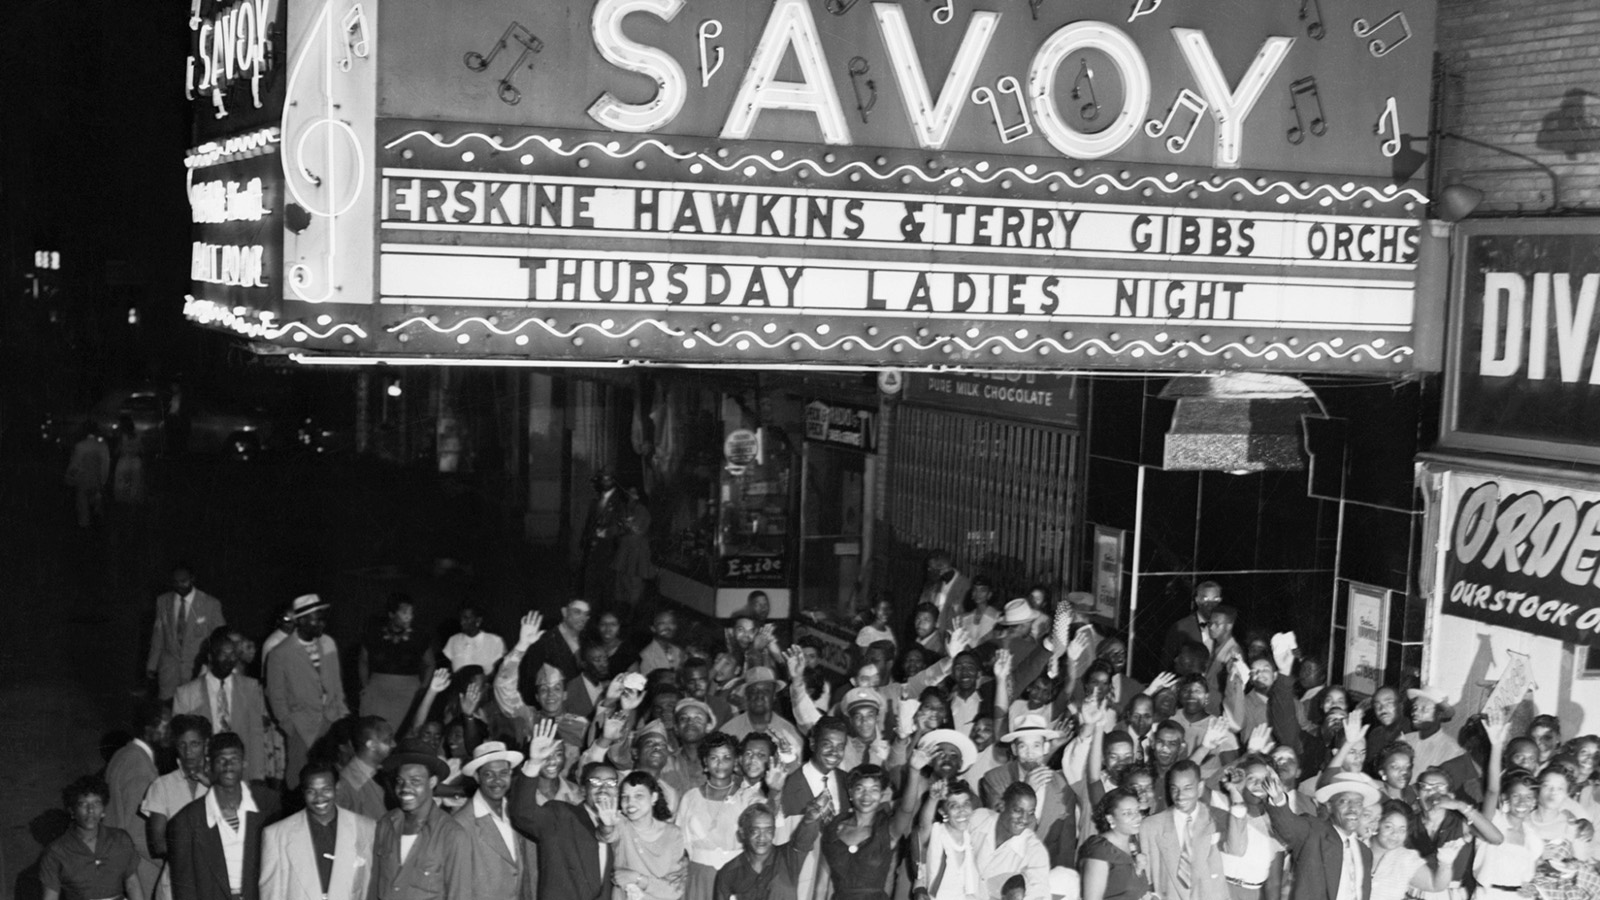 A black-and-white nighttime photo of a large crowd of Black attendees standing underneath the large marquee sign for the Savoy Ballroom. The crowd members are dressed in nice suits and dresses—some hold their hands up in the air in a friendly gesture toward the cameraperson. 